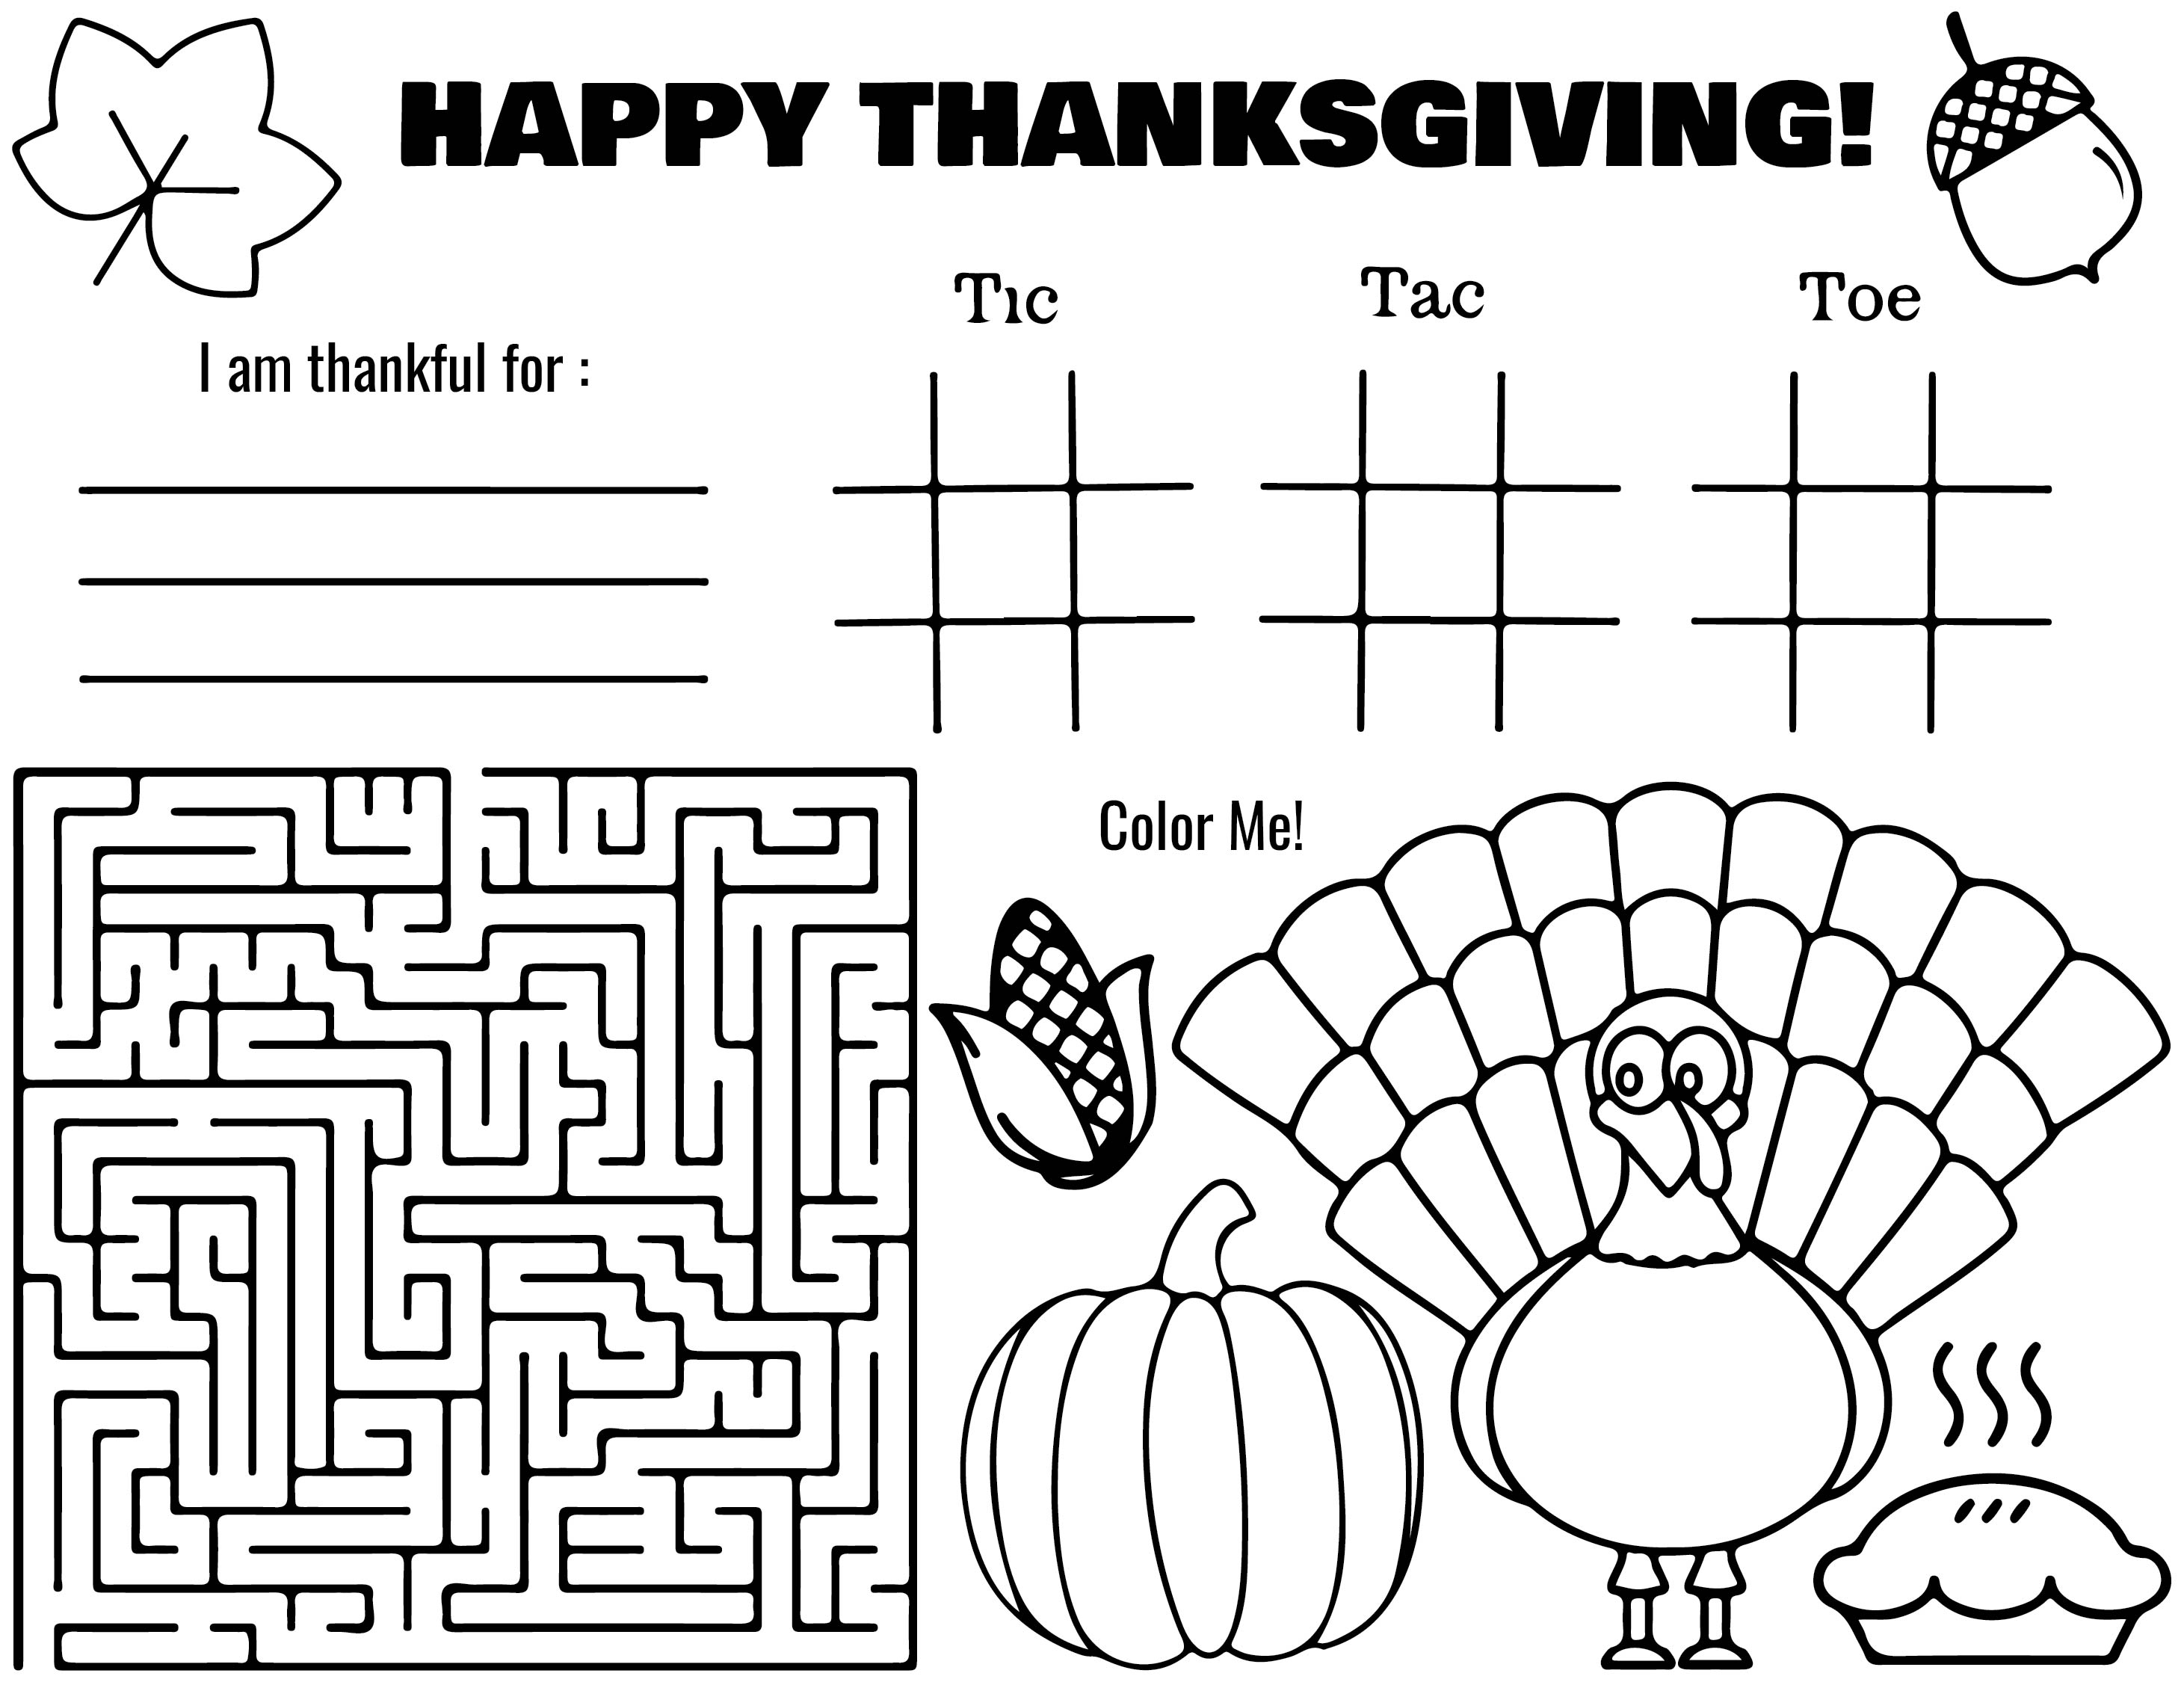 8 Best Images of Thanksgiving Activities Printable Placemat Free